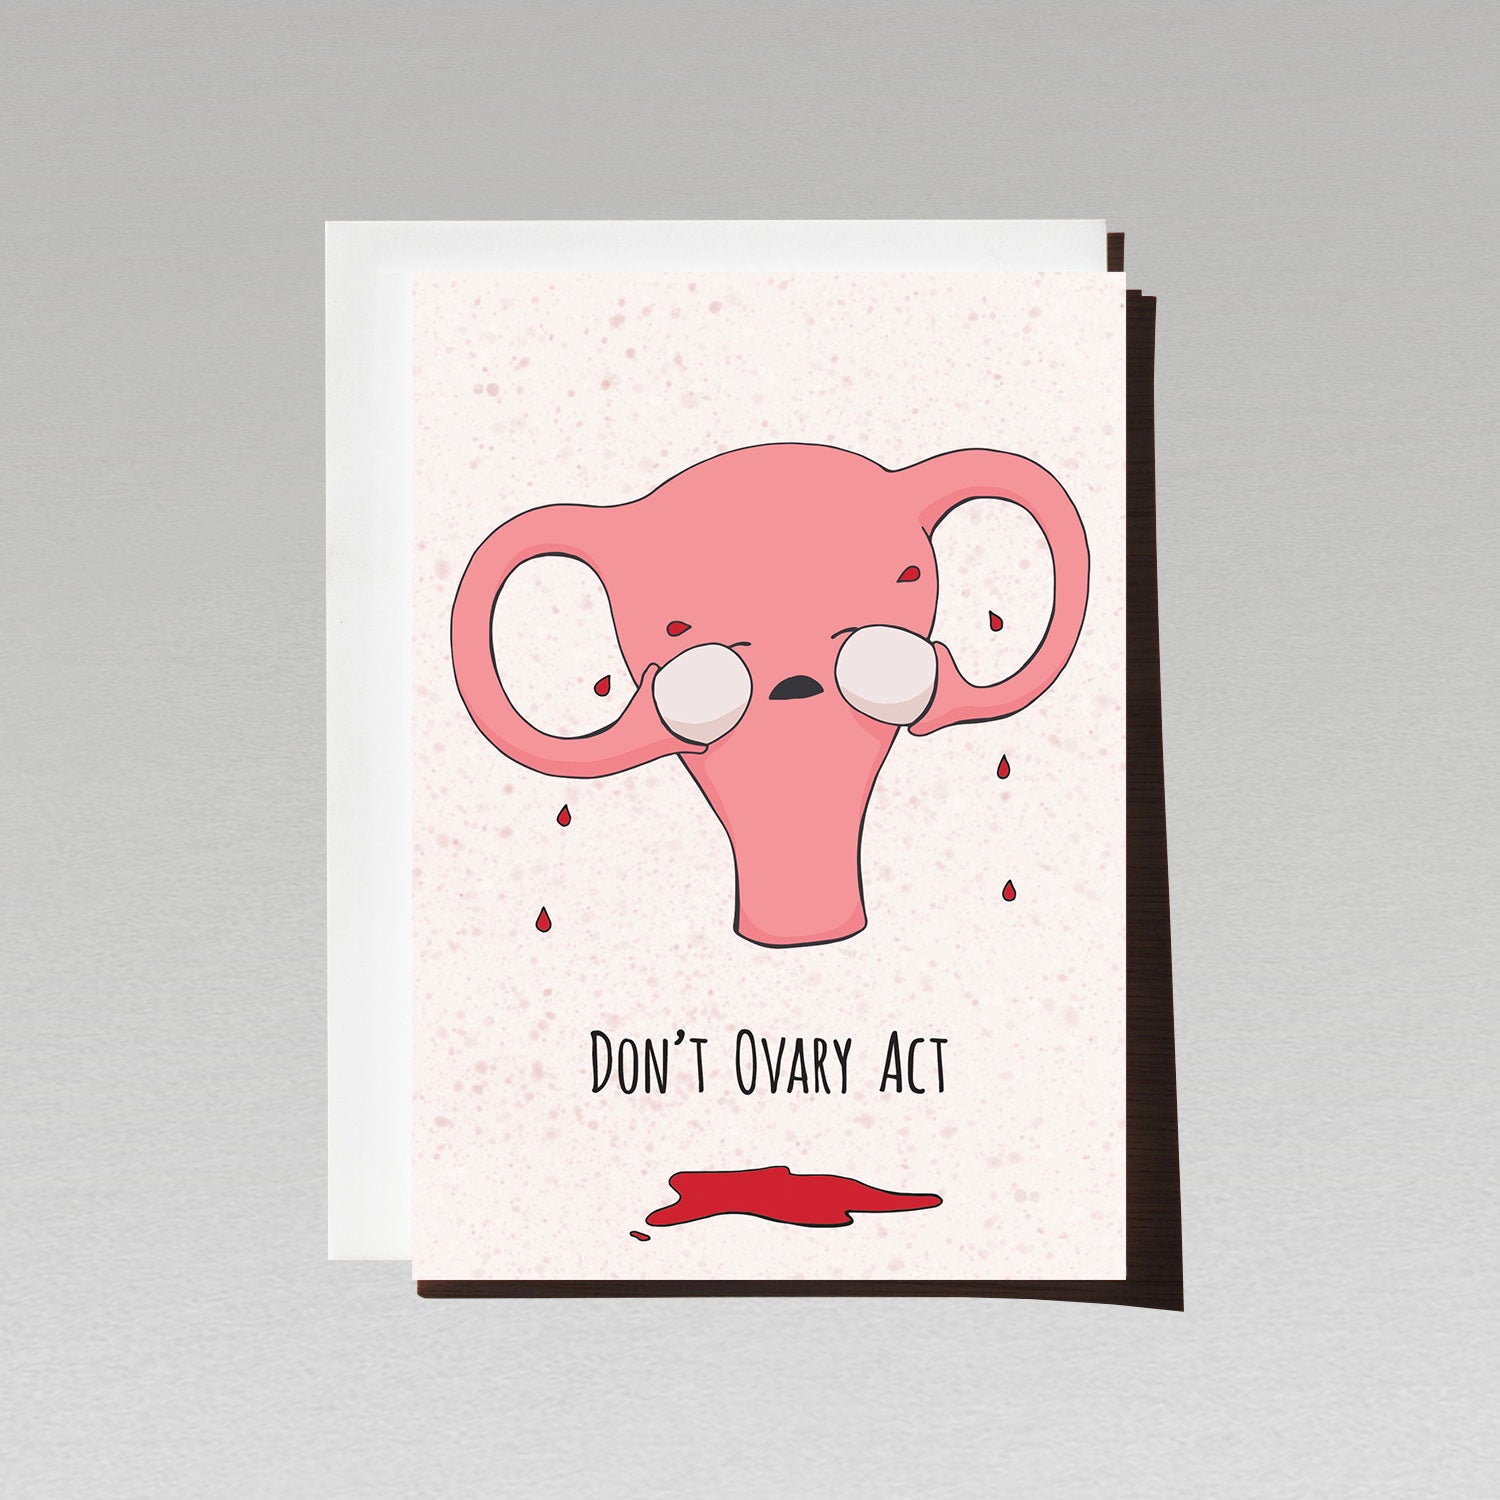 pms greeting card with cute uterus character crying blood tears with text don’t ovary act